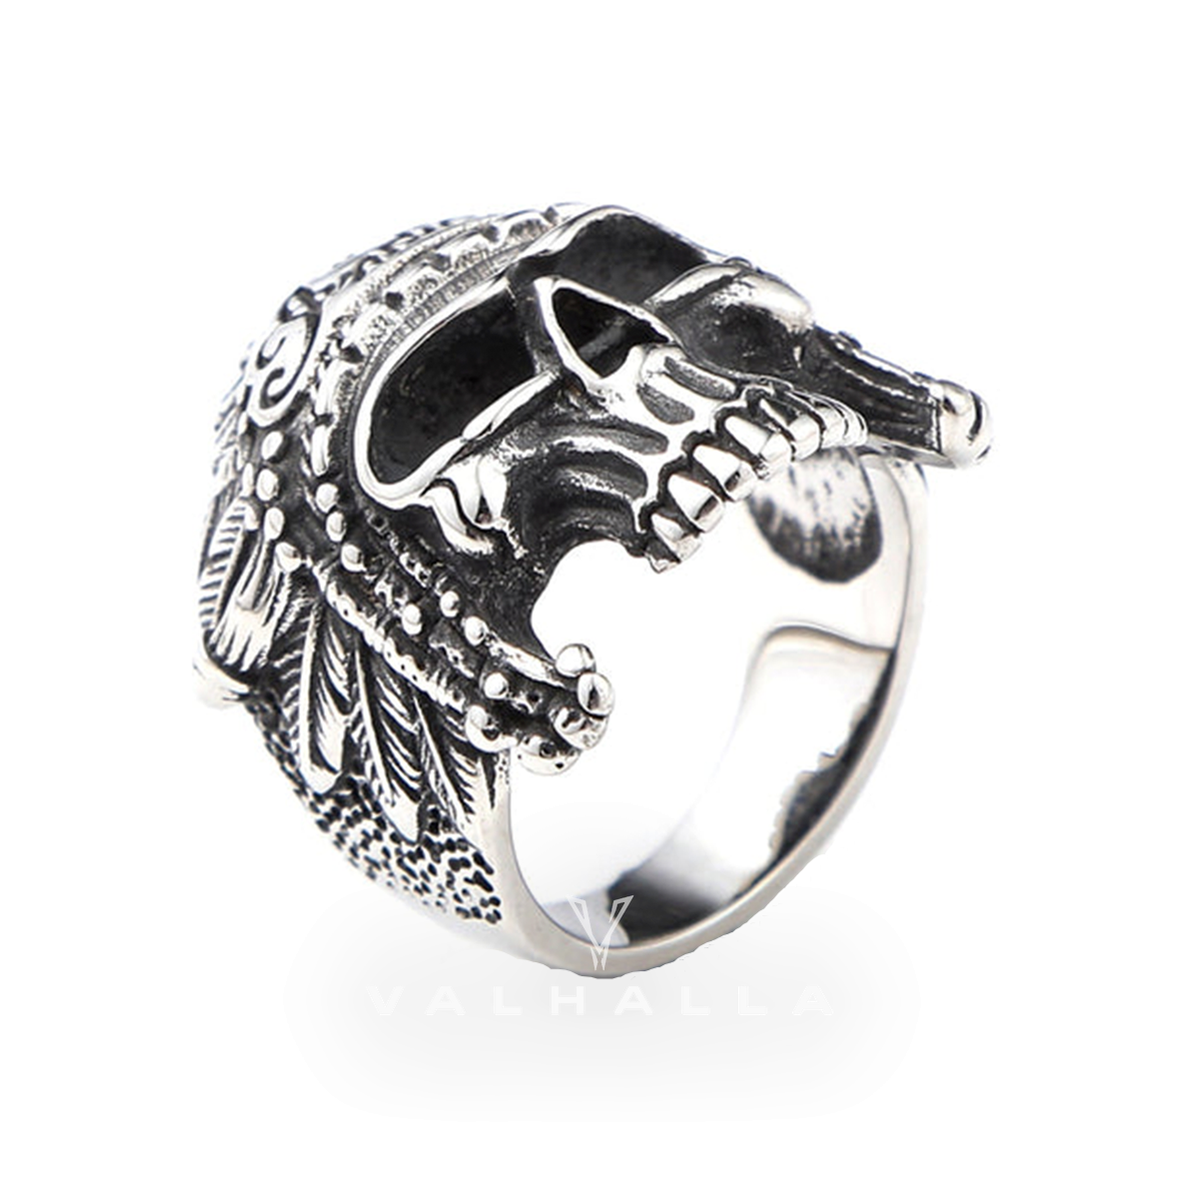 Native Indian Chiefs Skull Stainless Steel Ring